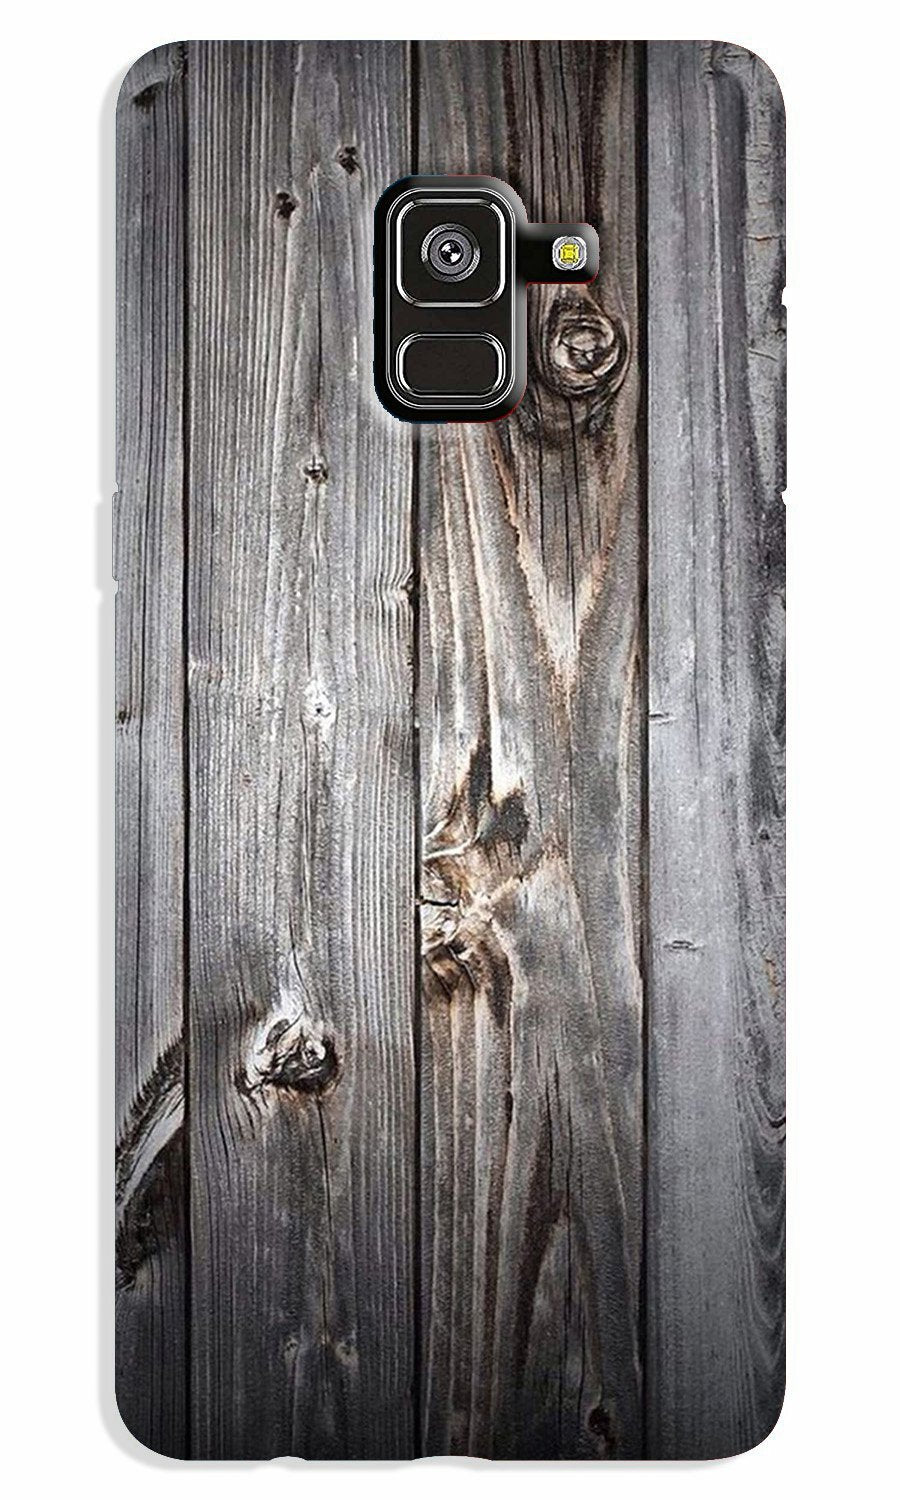 Wooden Look Case for Galaxy A8 Plus  (Design - 114)